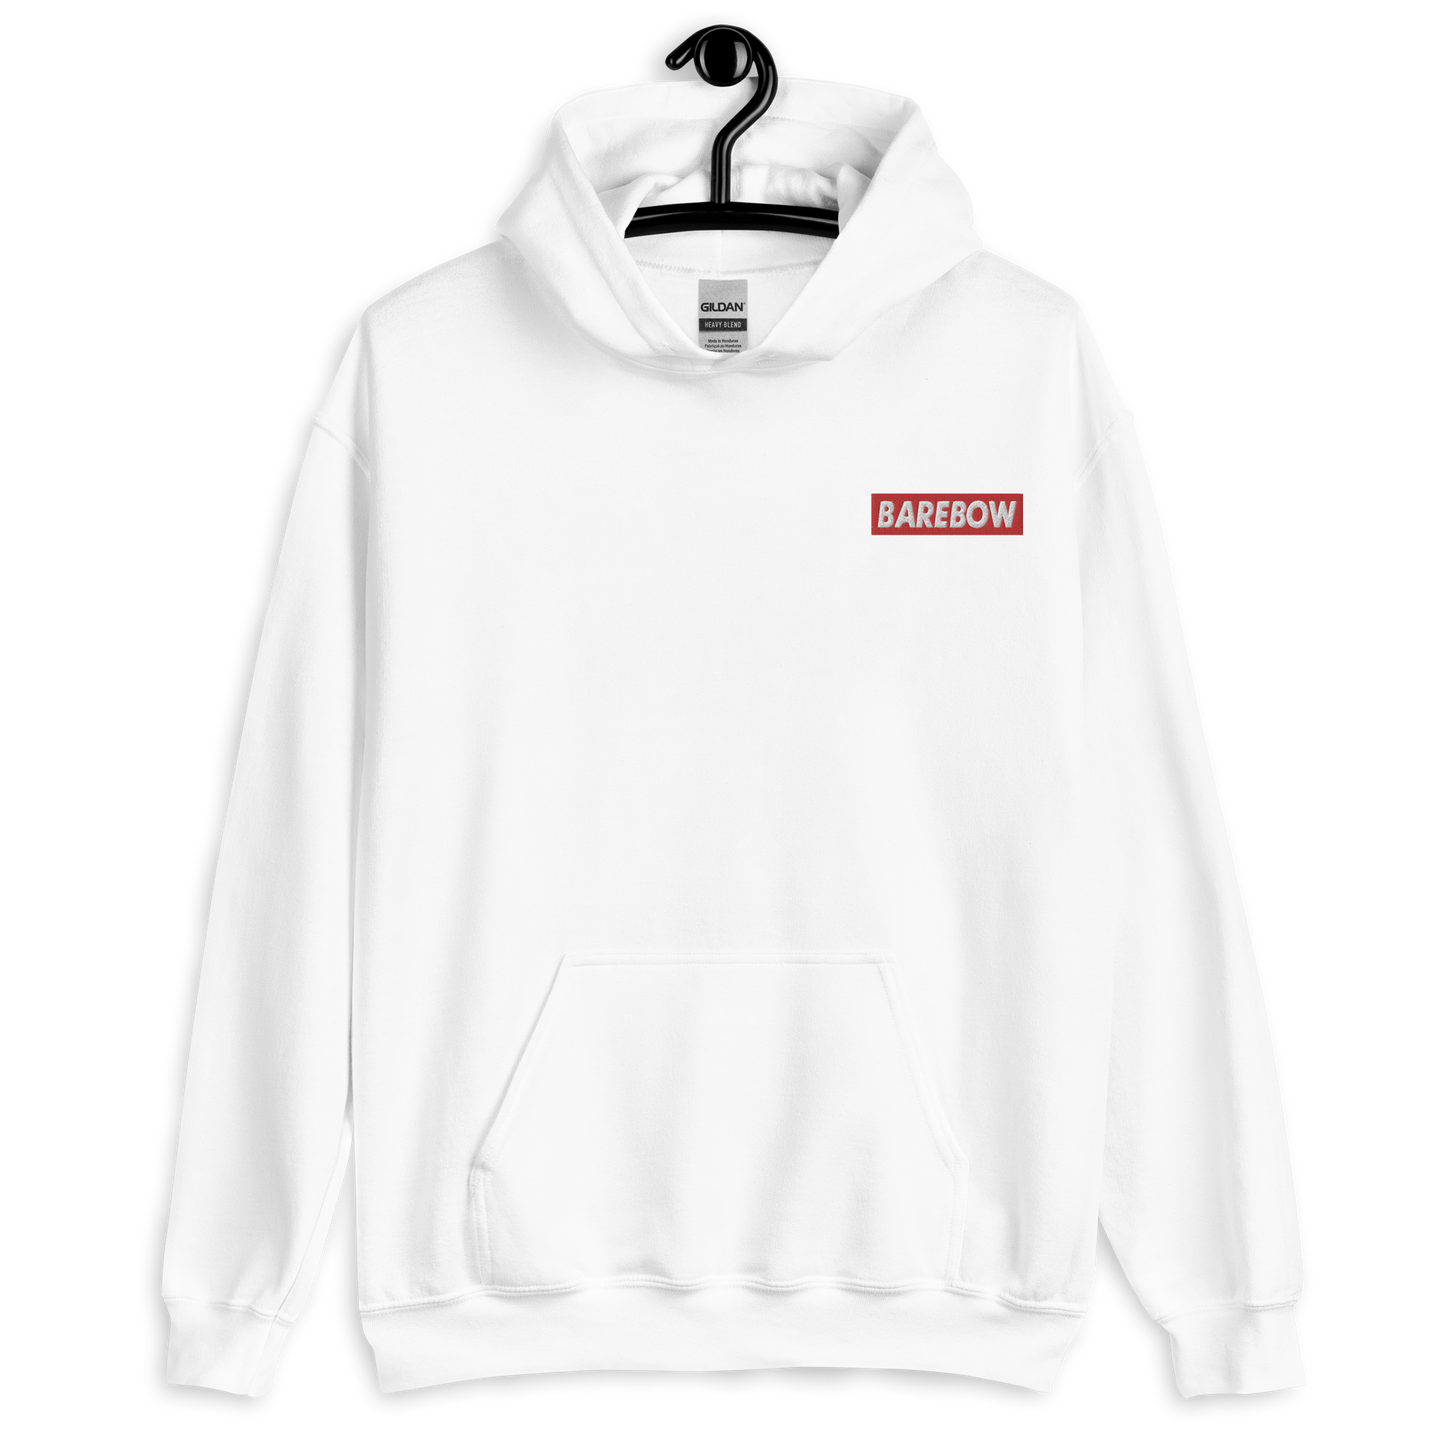 "Barebow" Embroidered Hoodie